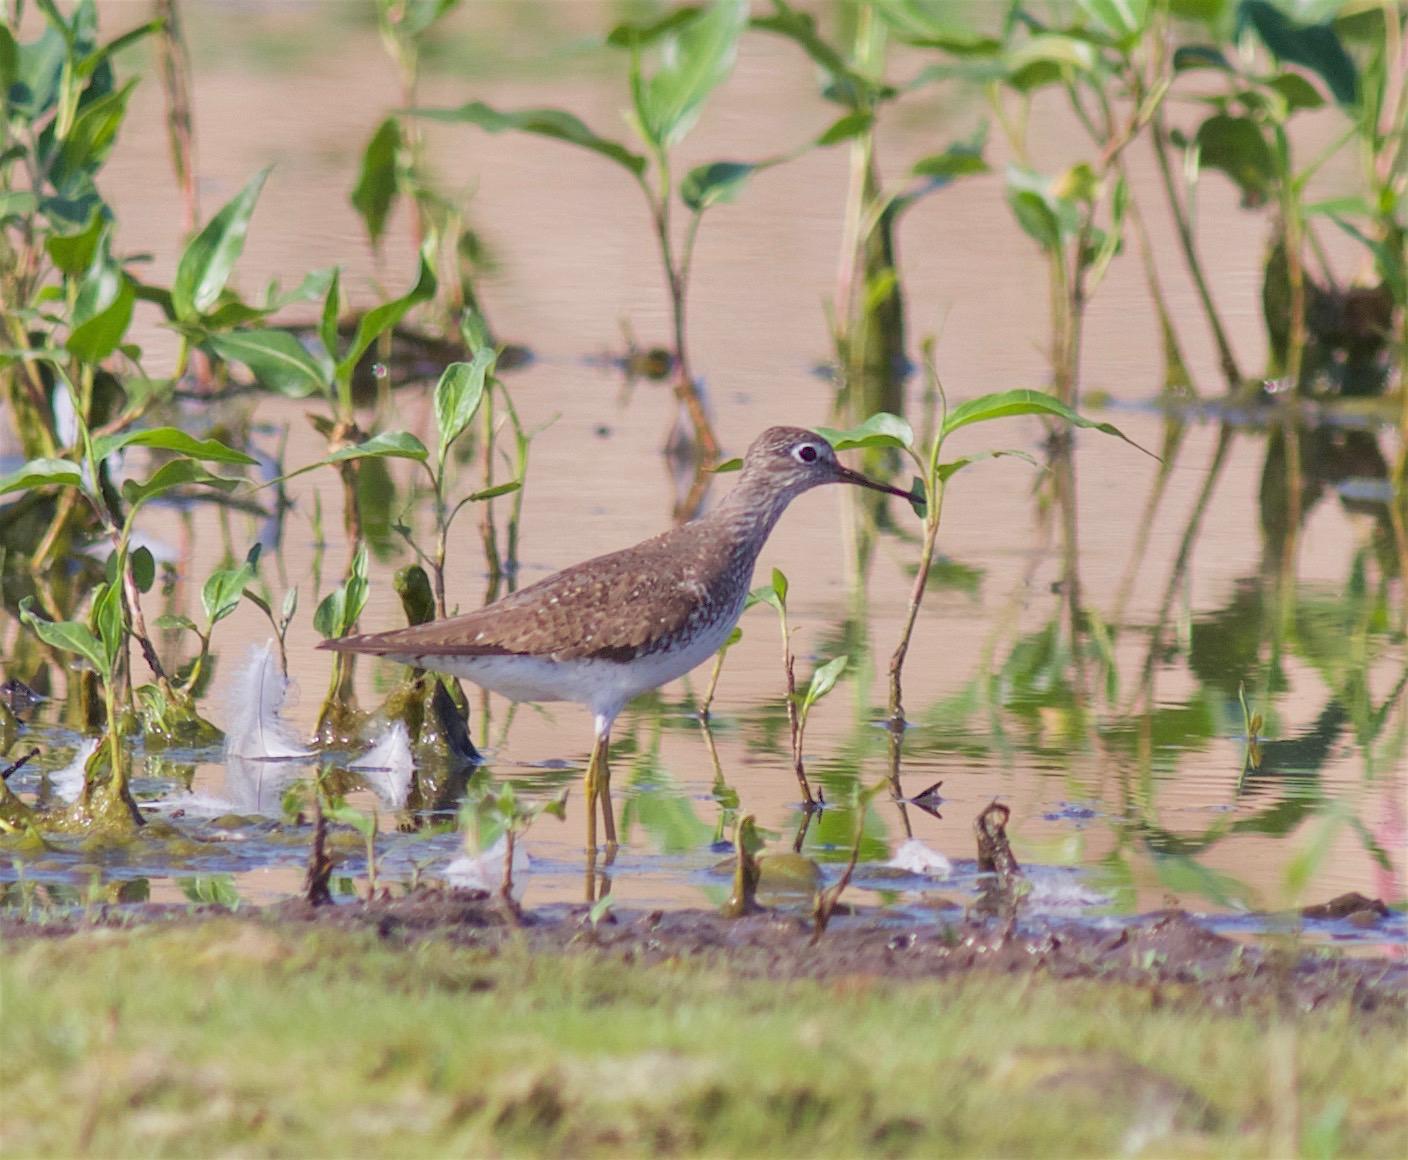 Solitary Sandpiper Photo by Kathryn Keith